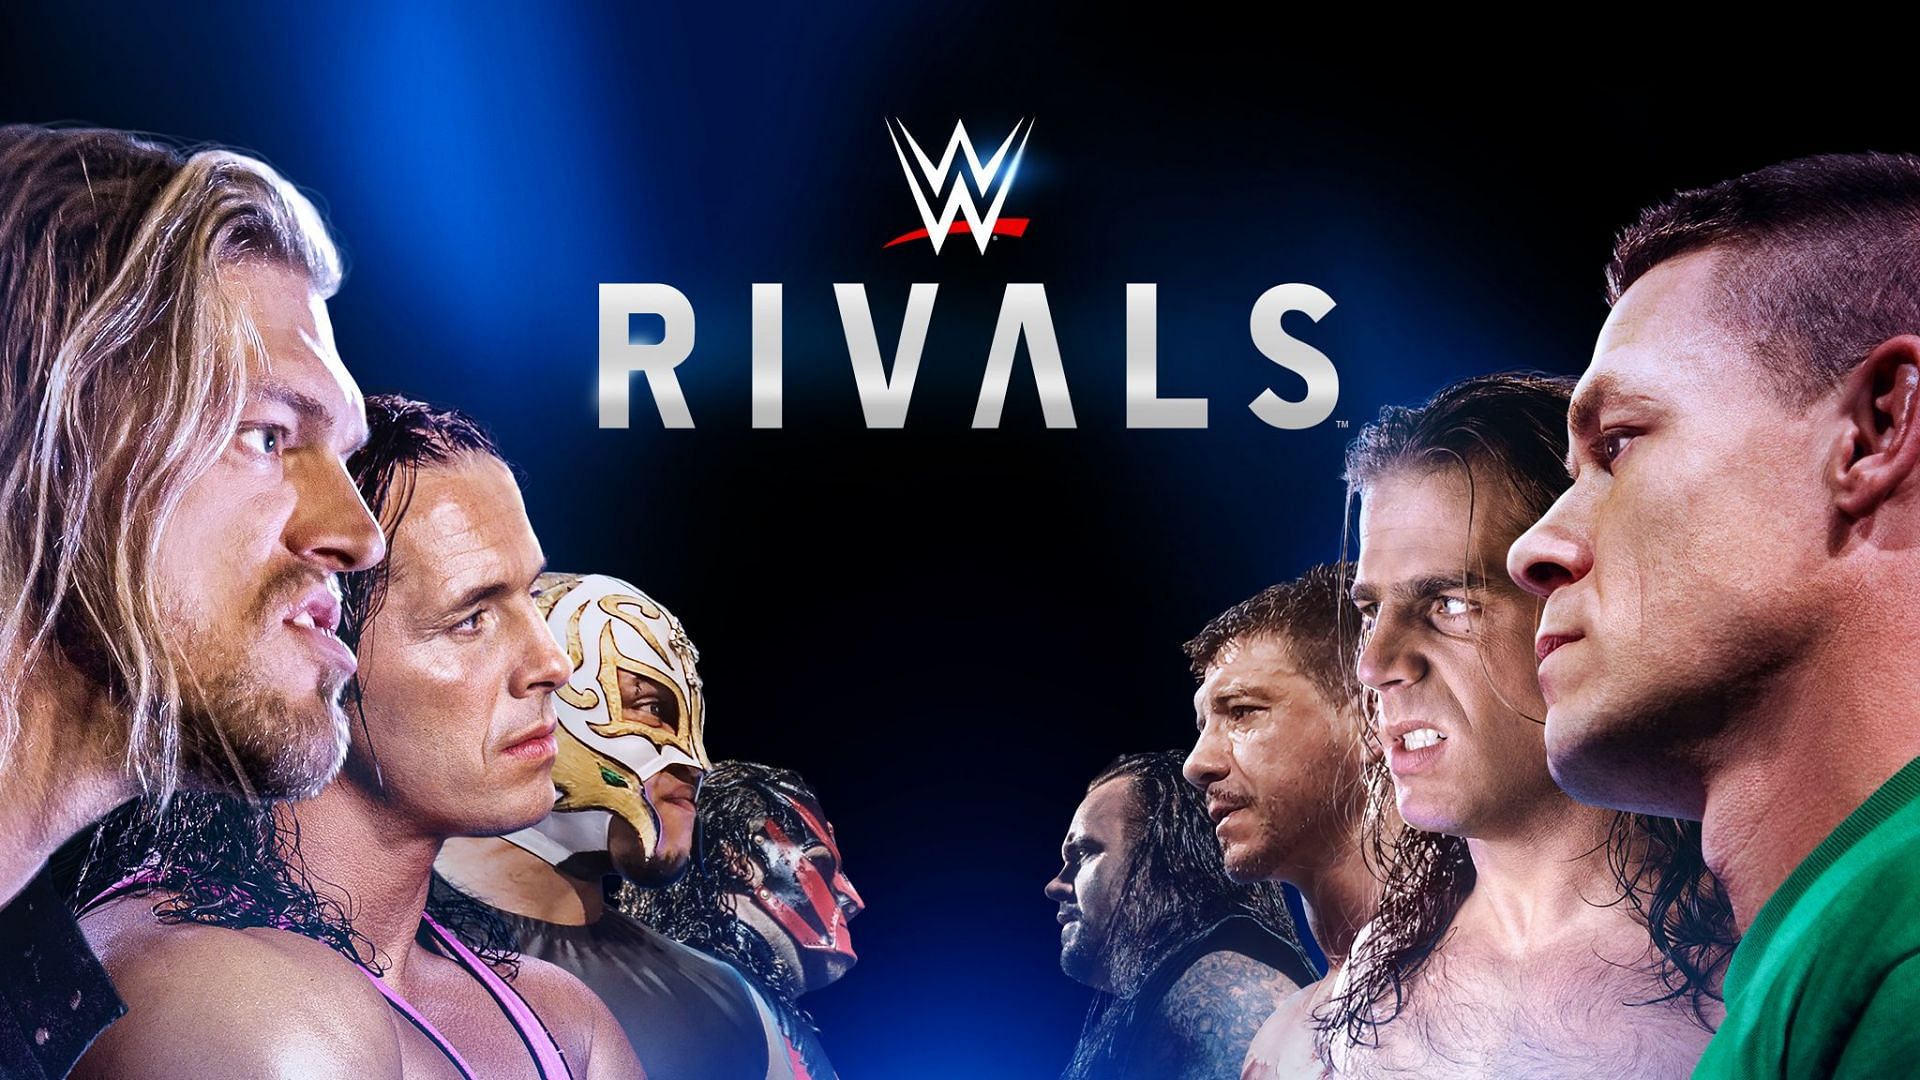 Some of the best rivalries in WWE history actually happened behind the scenes, then came to light on WWE television.